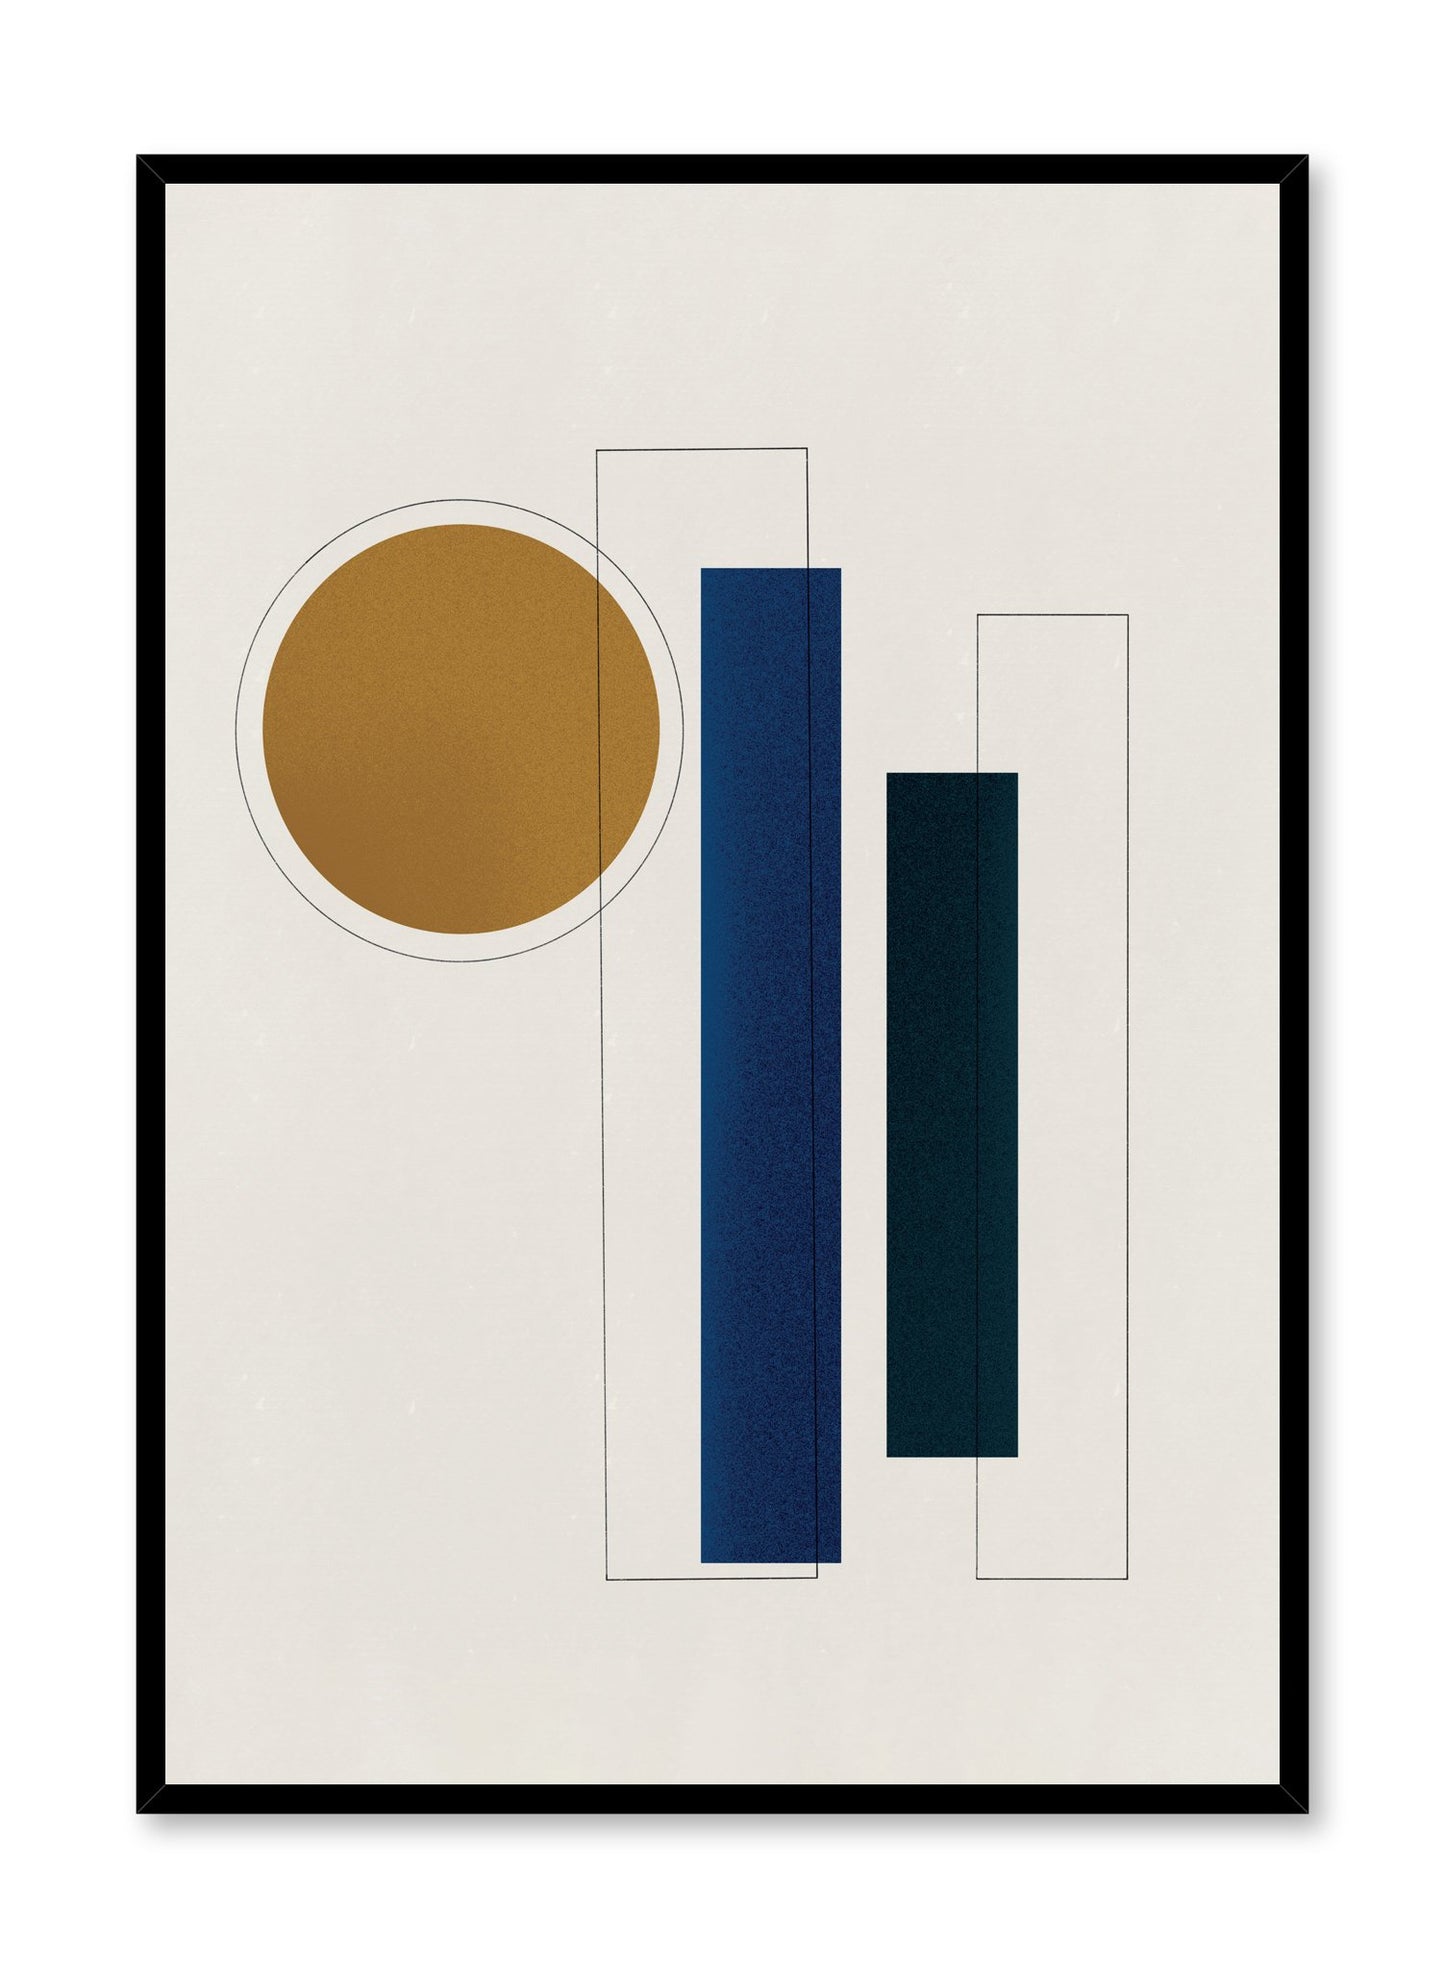 Modern abstract poster by Opposite Wall with mid-century modern geometric shapes by Toffie Affichiste